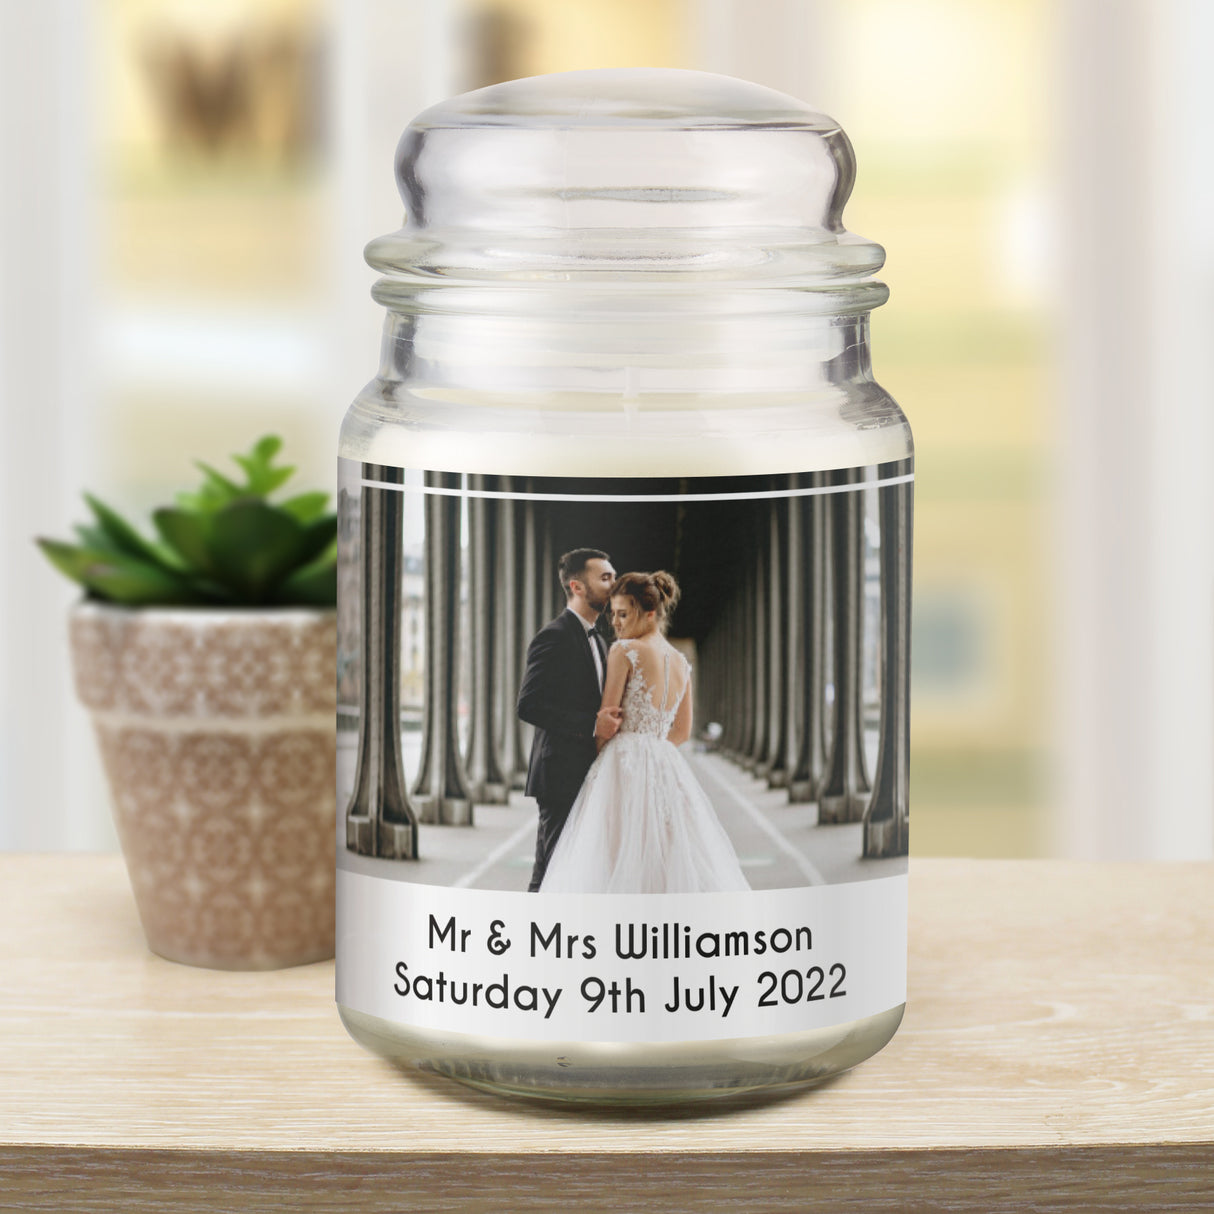 Photo Upload Scented Jar Candle - Gift Moments